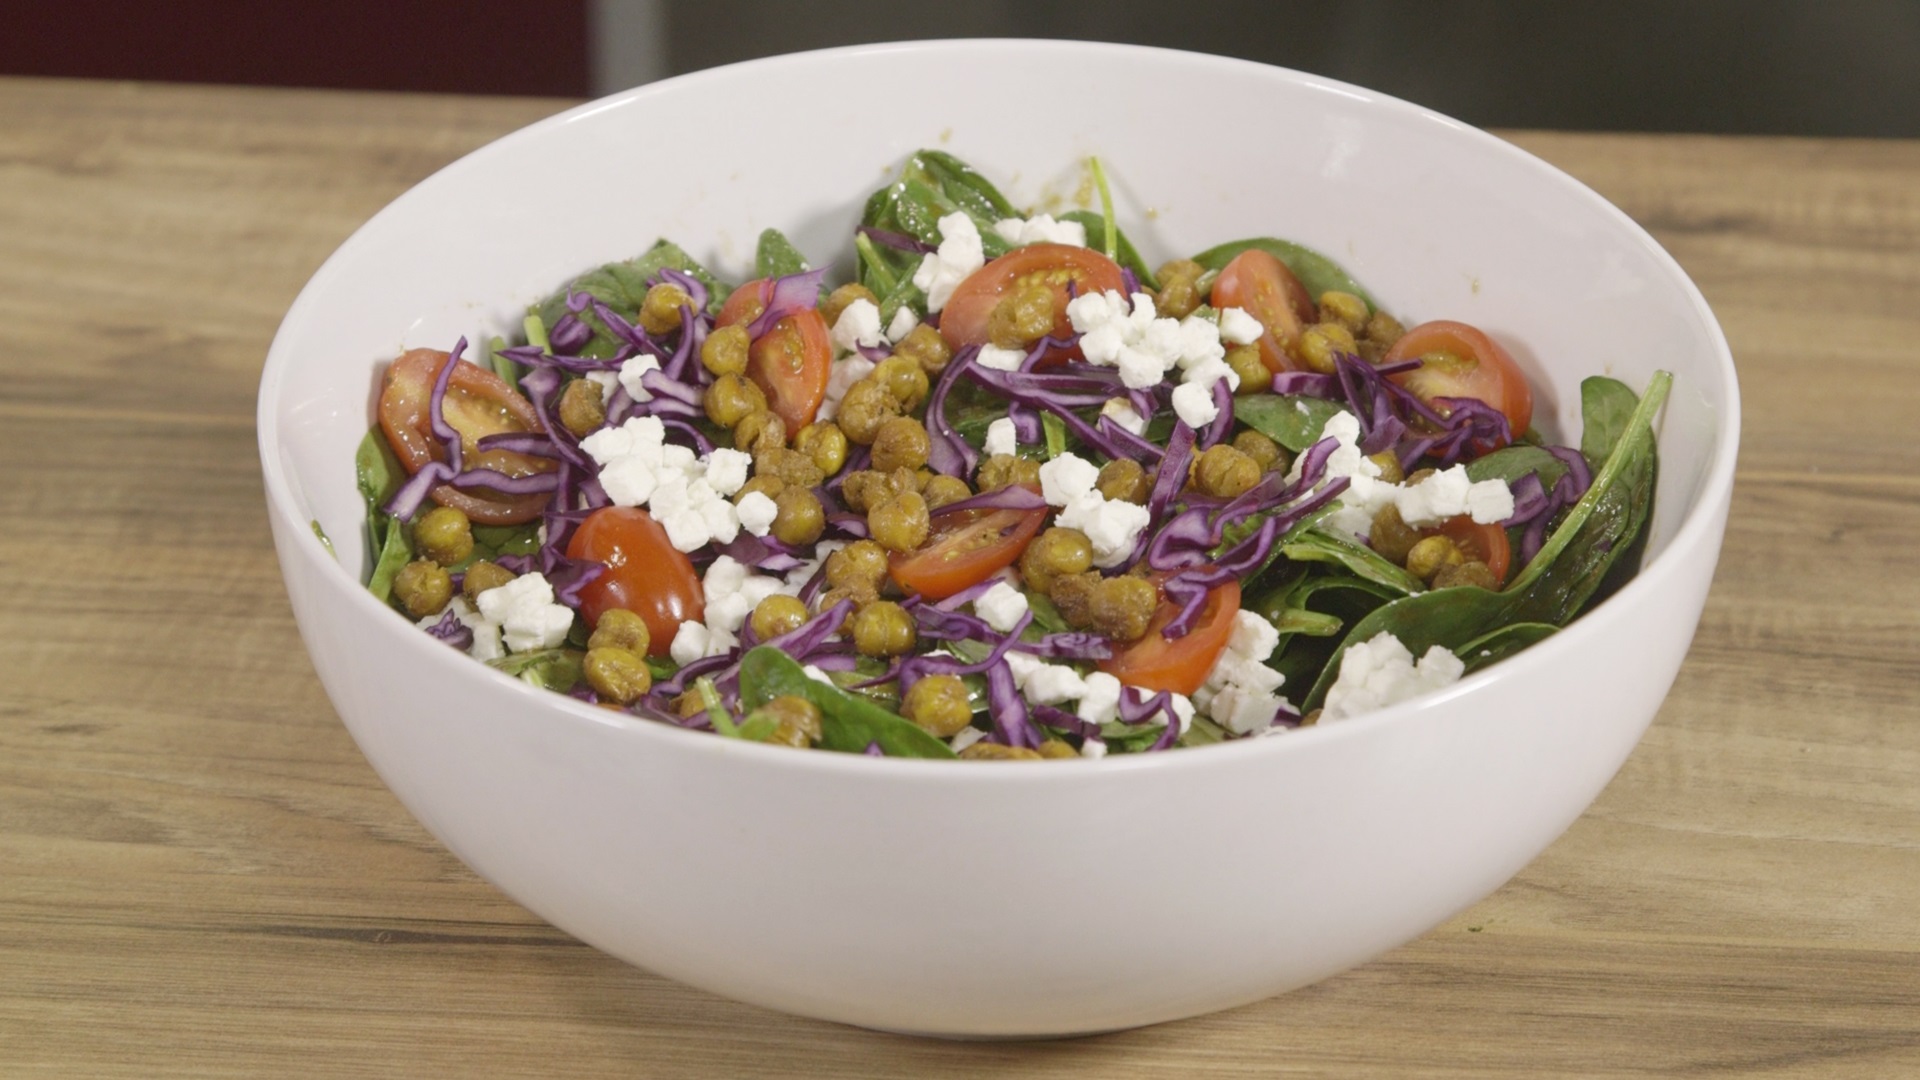 Protein Alternatives: Chickpea spinach salad | The GoodLife Fitness Blog